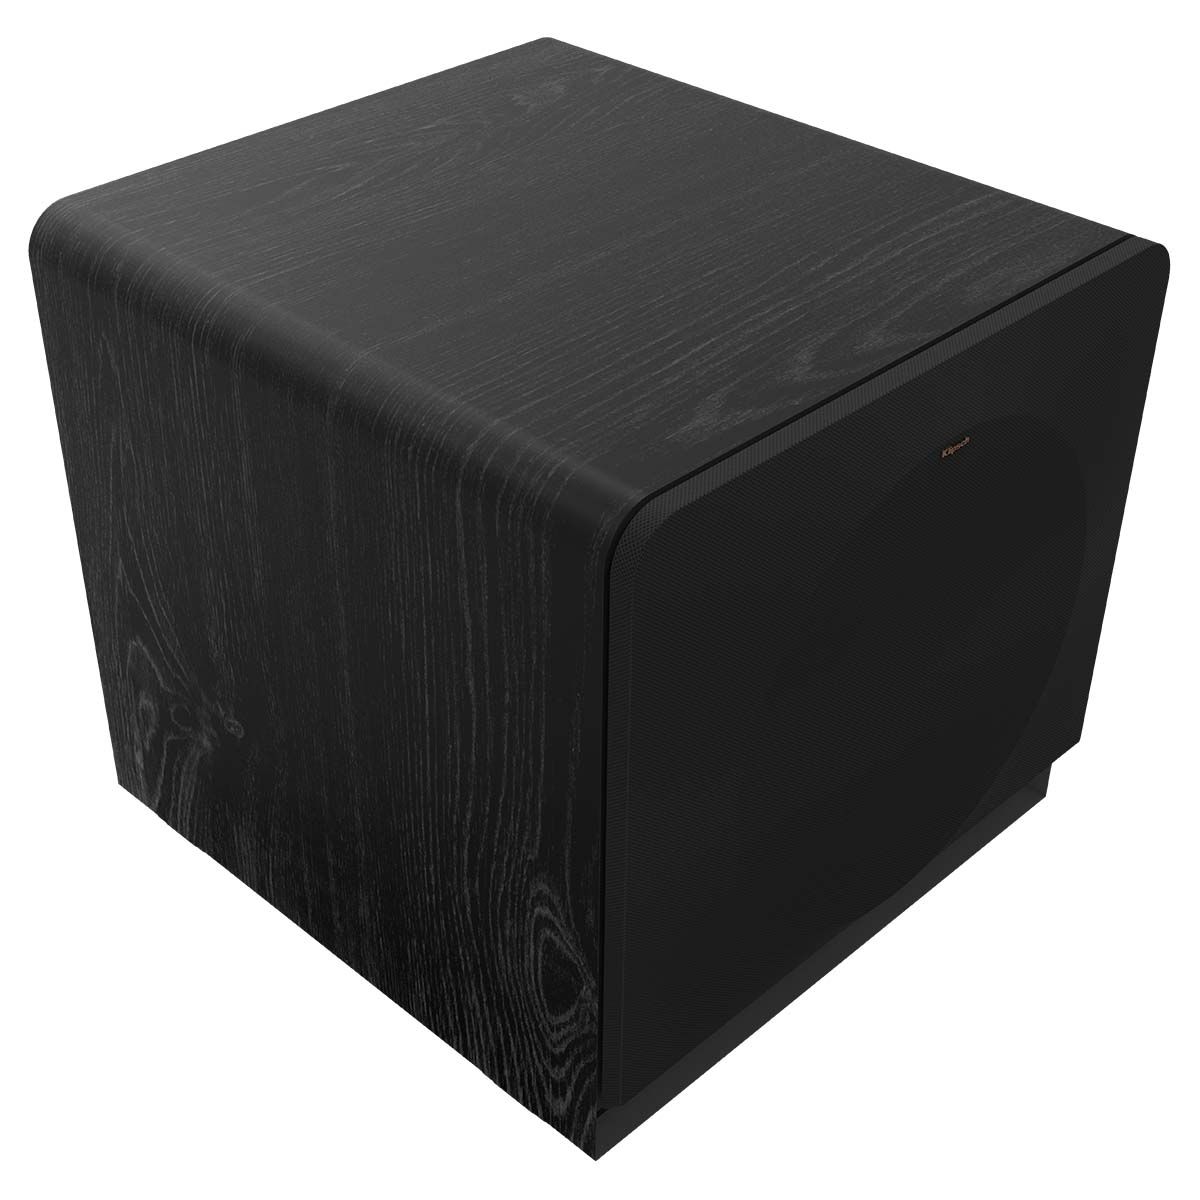 Klipsch RP-1600SW 16" Powered Subwoofer - Ebony - angled top left view with grille